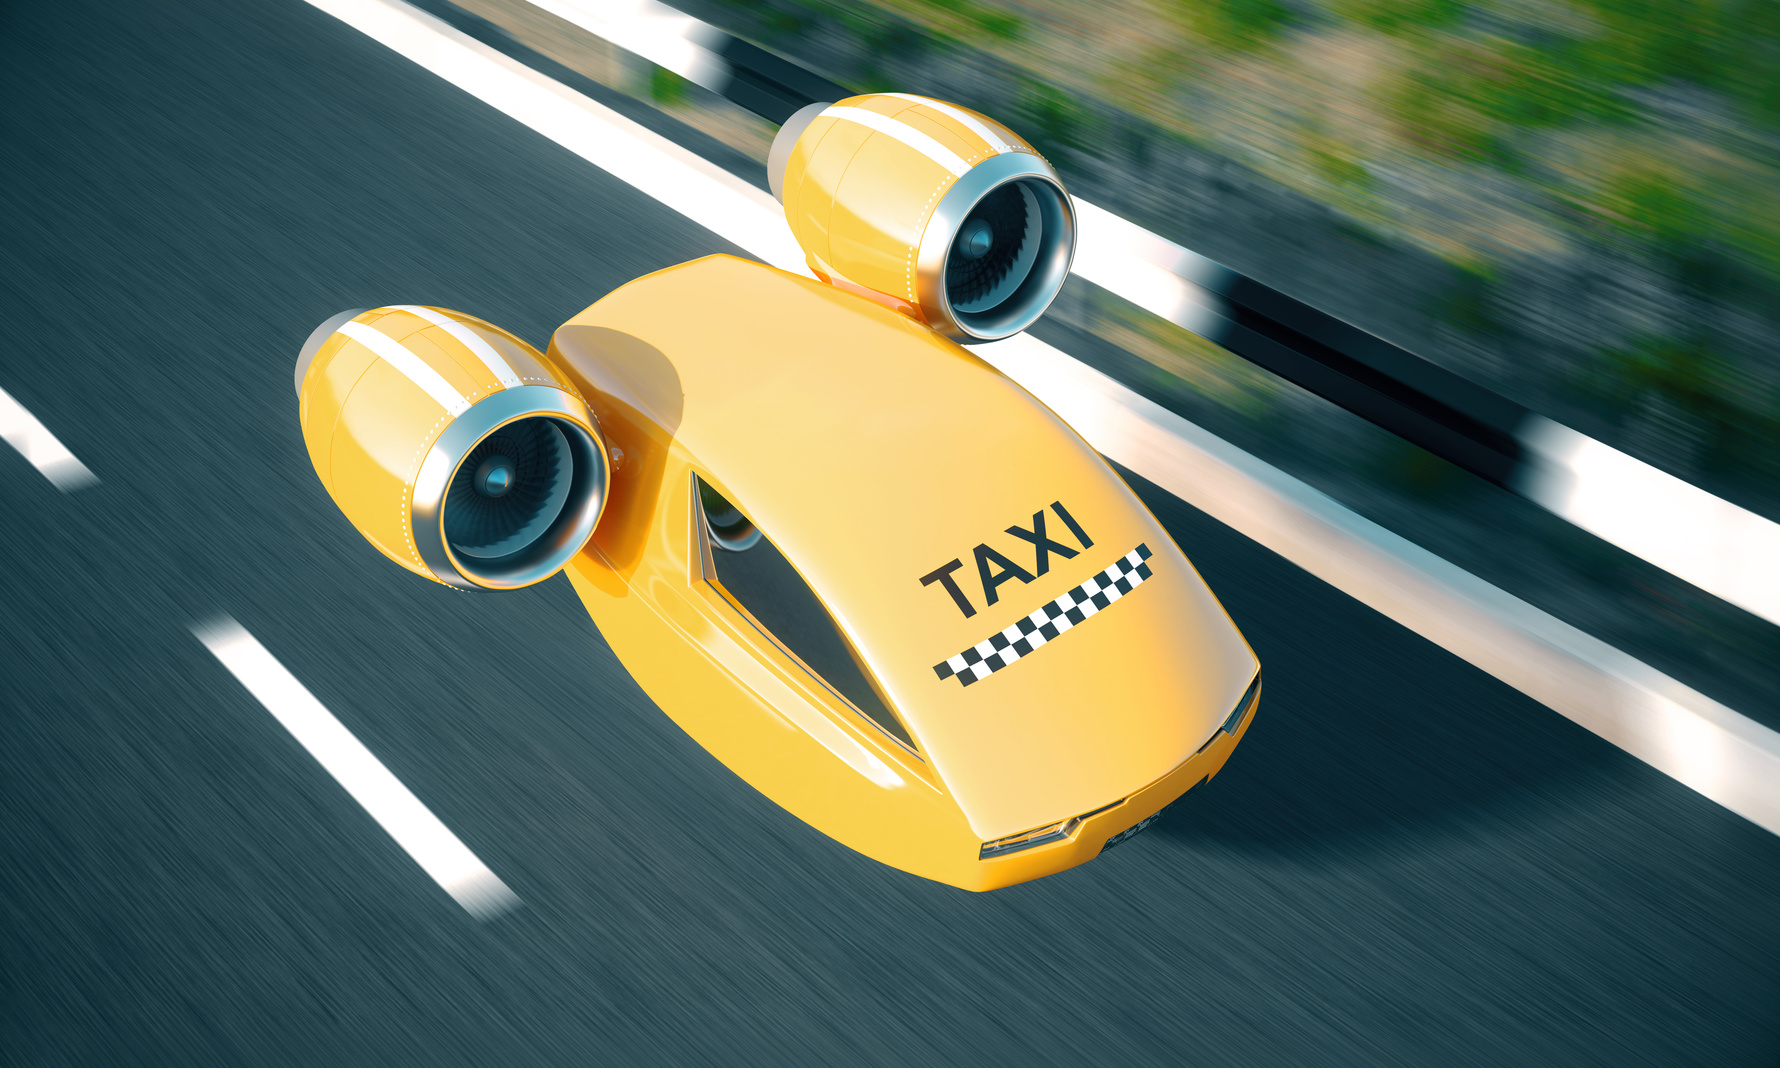 Fast motion blurred taxicab perform fast delivery of passenger